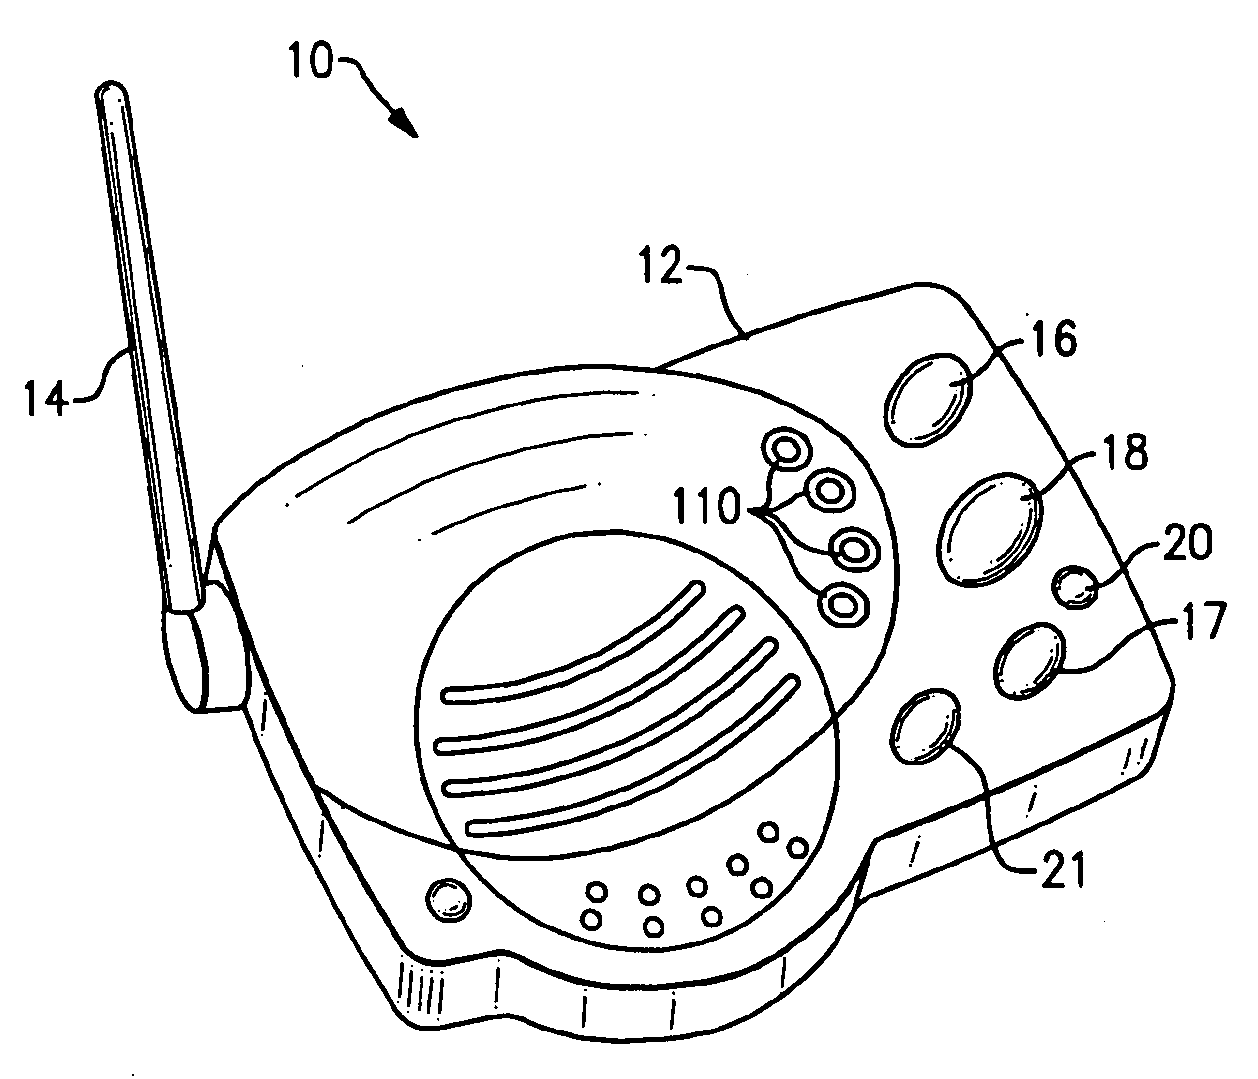 Wirefree intercom having low power system and process